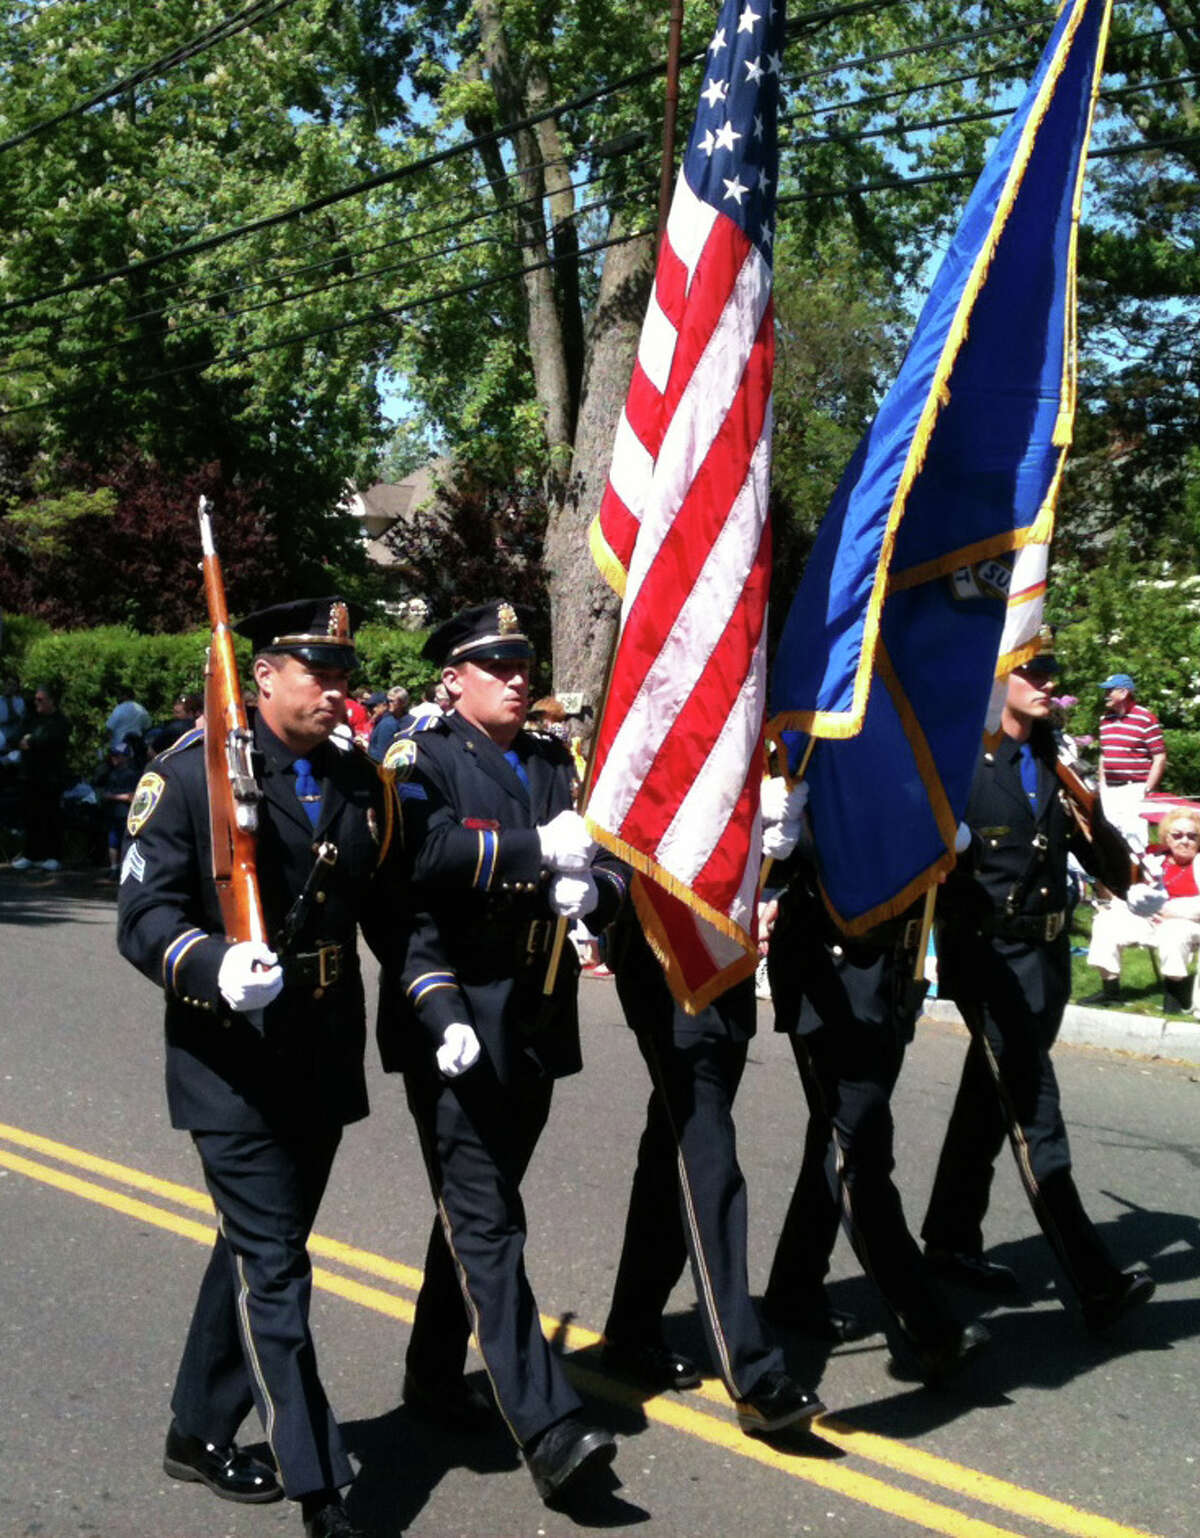 On Fairfield's Memorial Day, a salute to sacrifices by those who served